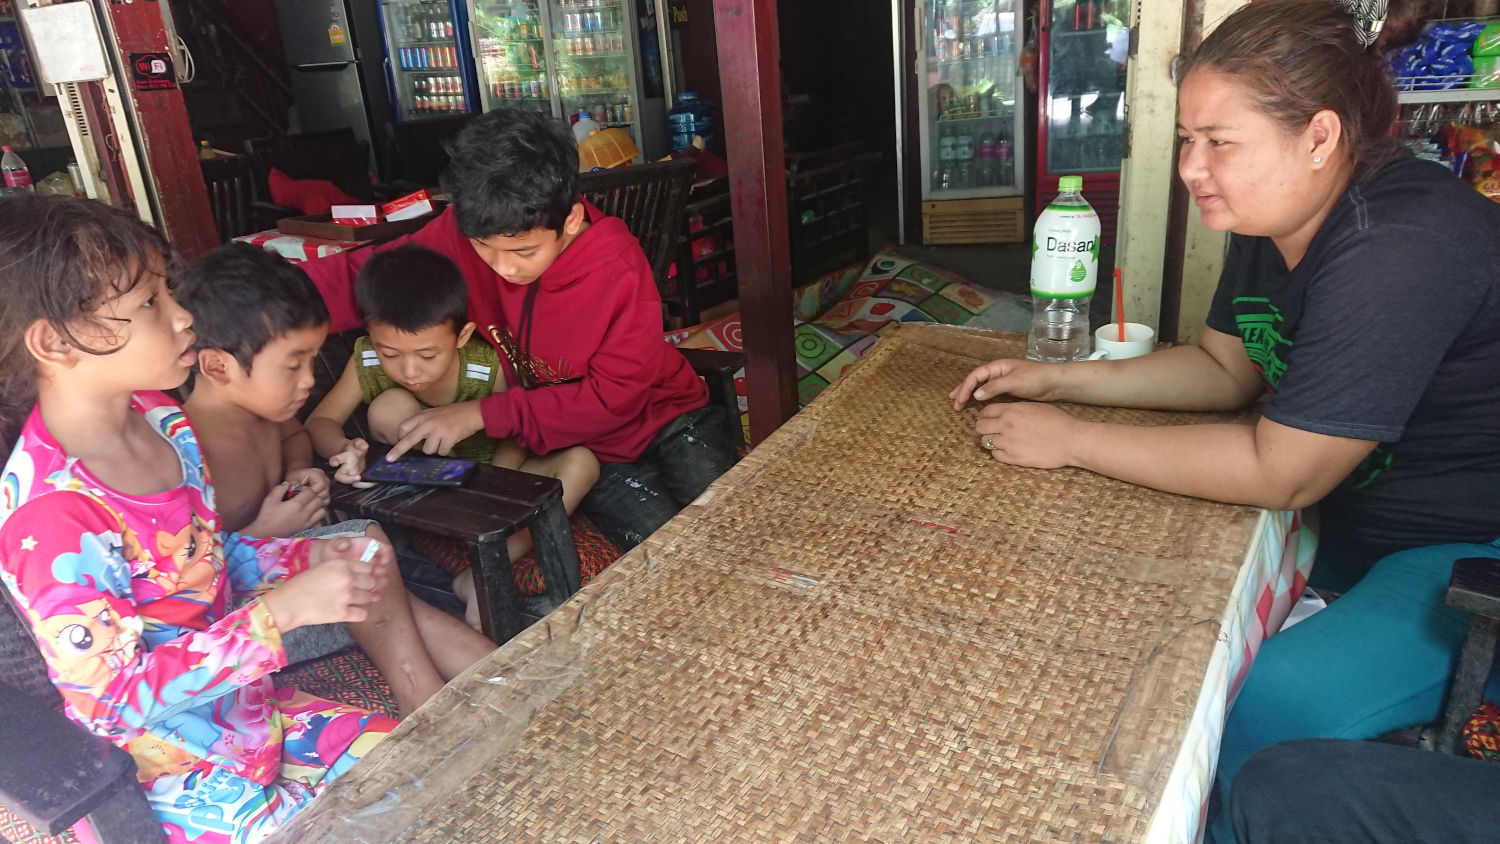 Kids playing a game app on smartphone. They play games everyday, said the mother. Wat Bo, Siem Reap